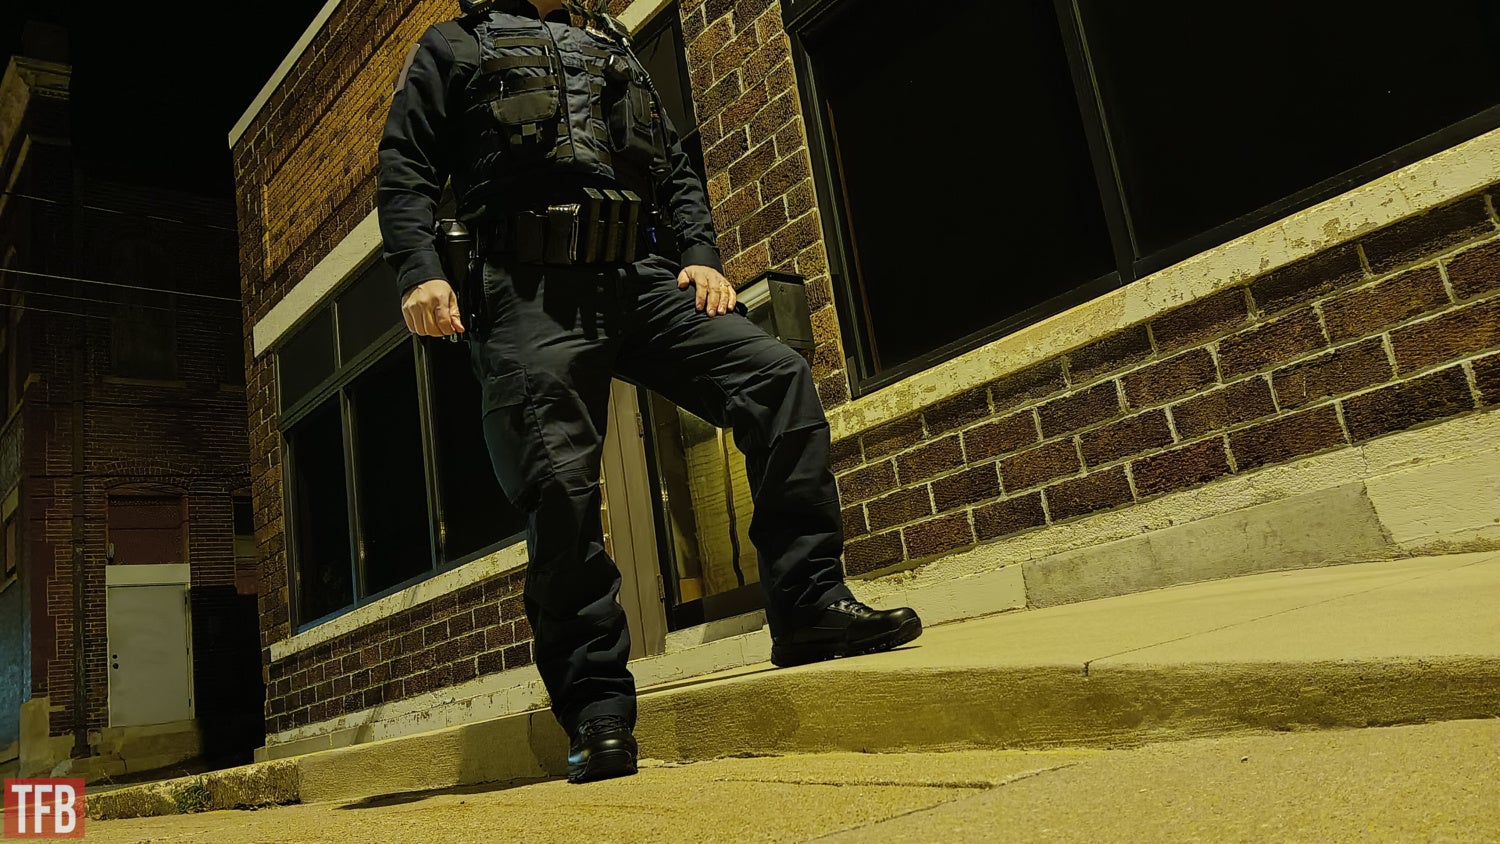 LA Police Gear Urban Ops Tactical Pants Review